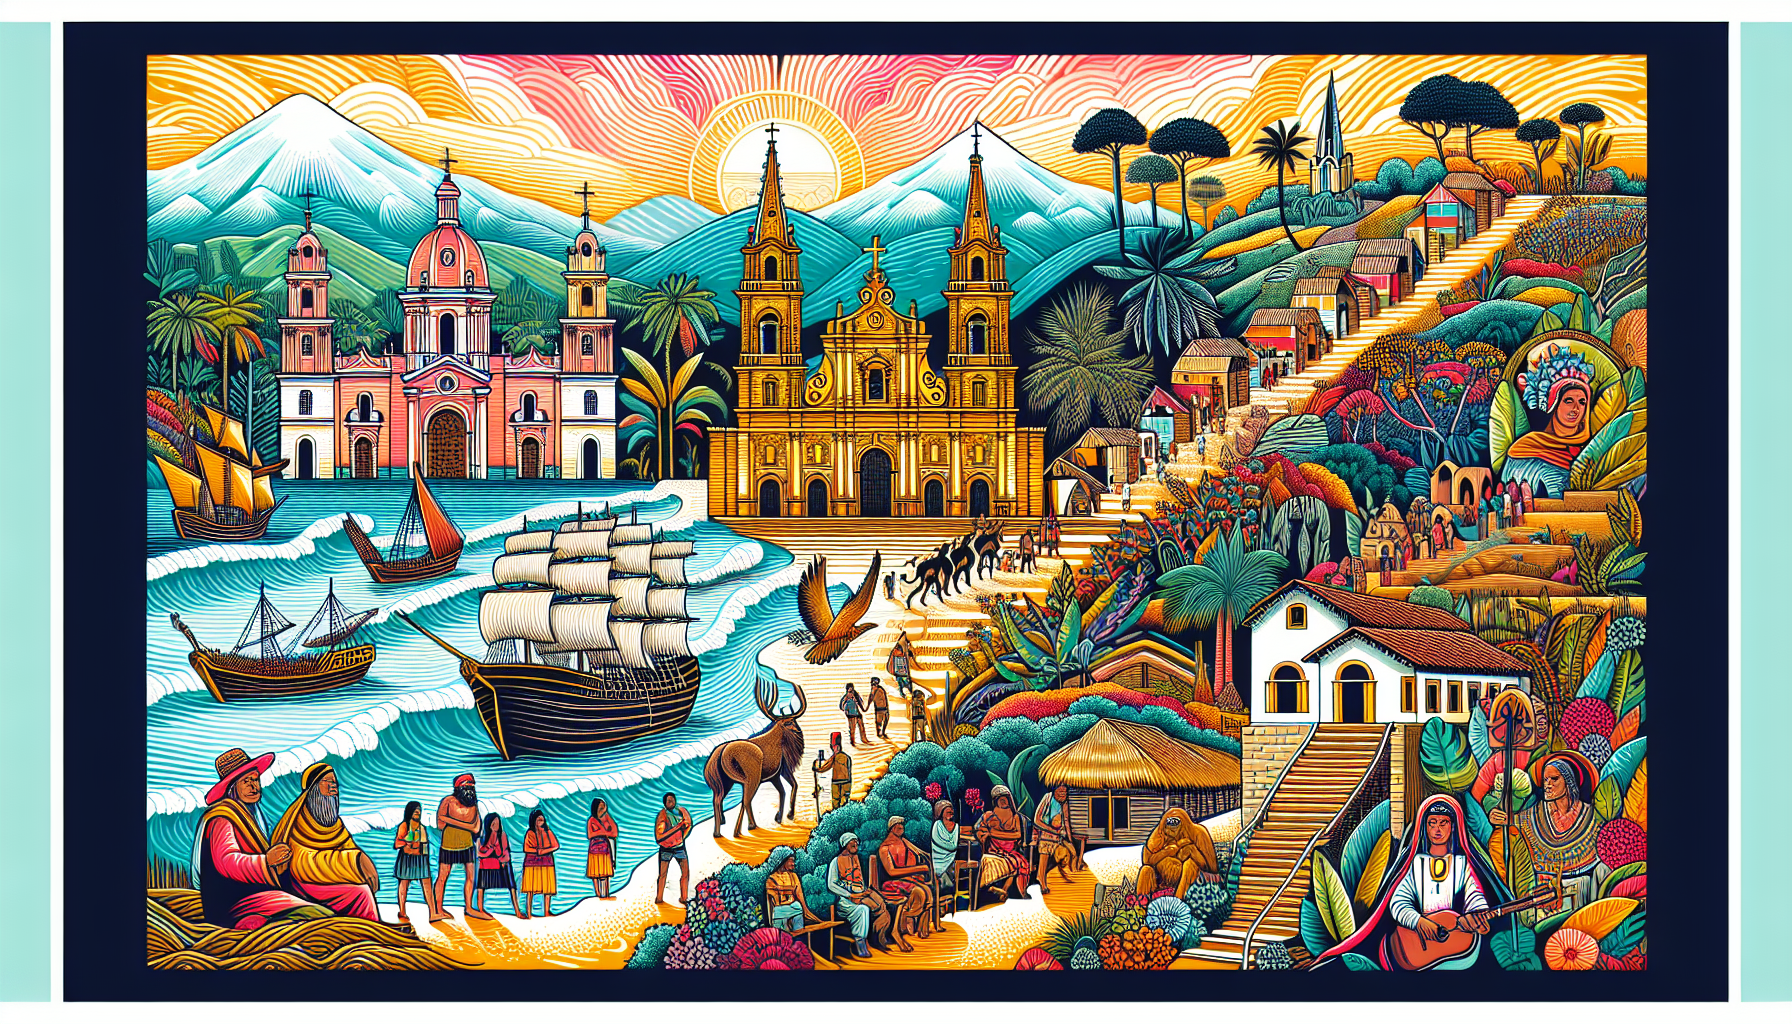 An intricate painting depicting a timeline of Christianity in Colombia, showing Spanish missionaries arriving, indigenous conversions, and the evolution of church architecture from colonial to modern